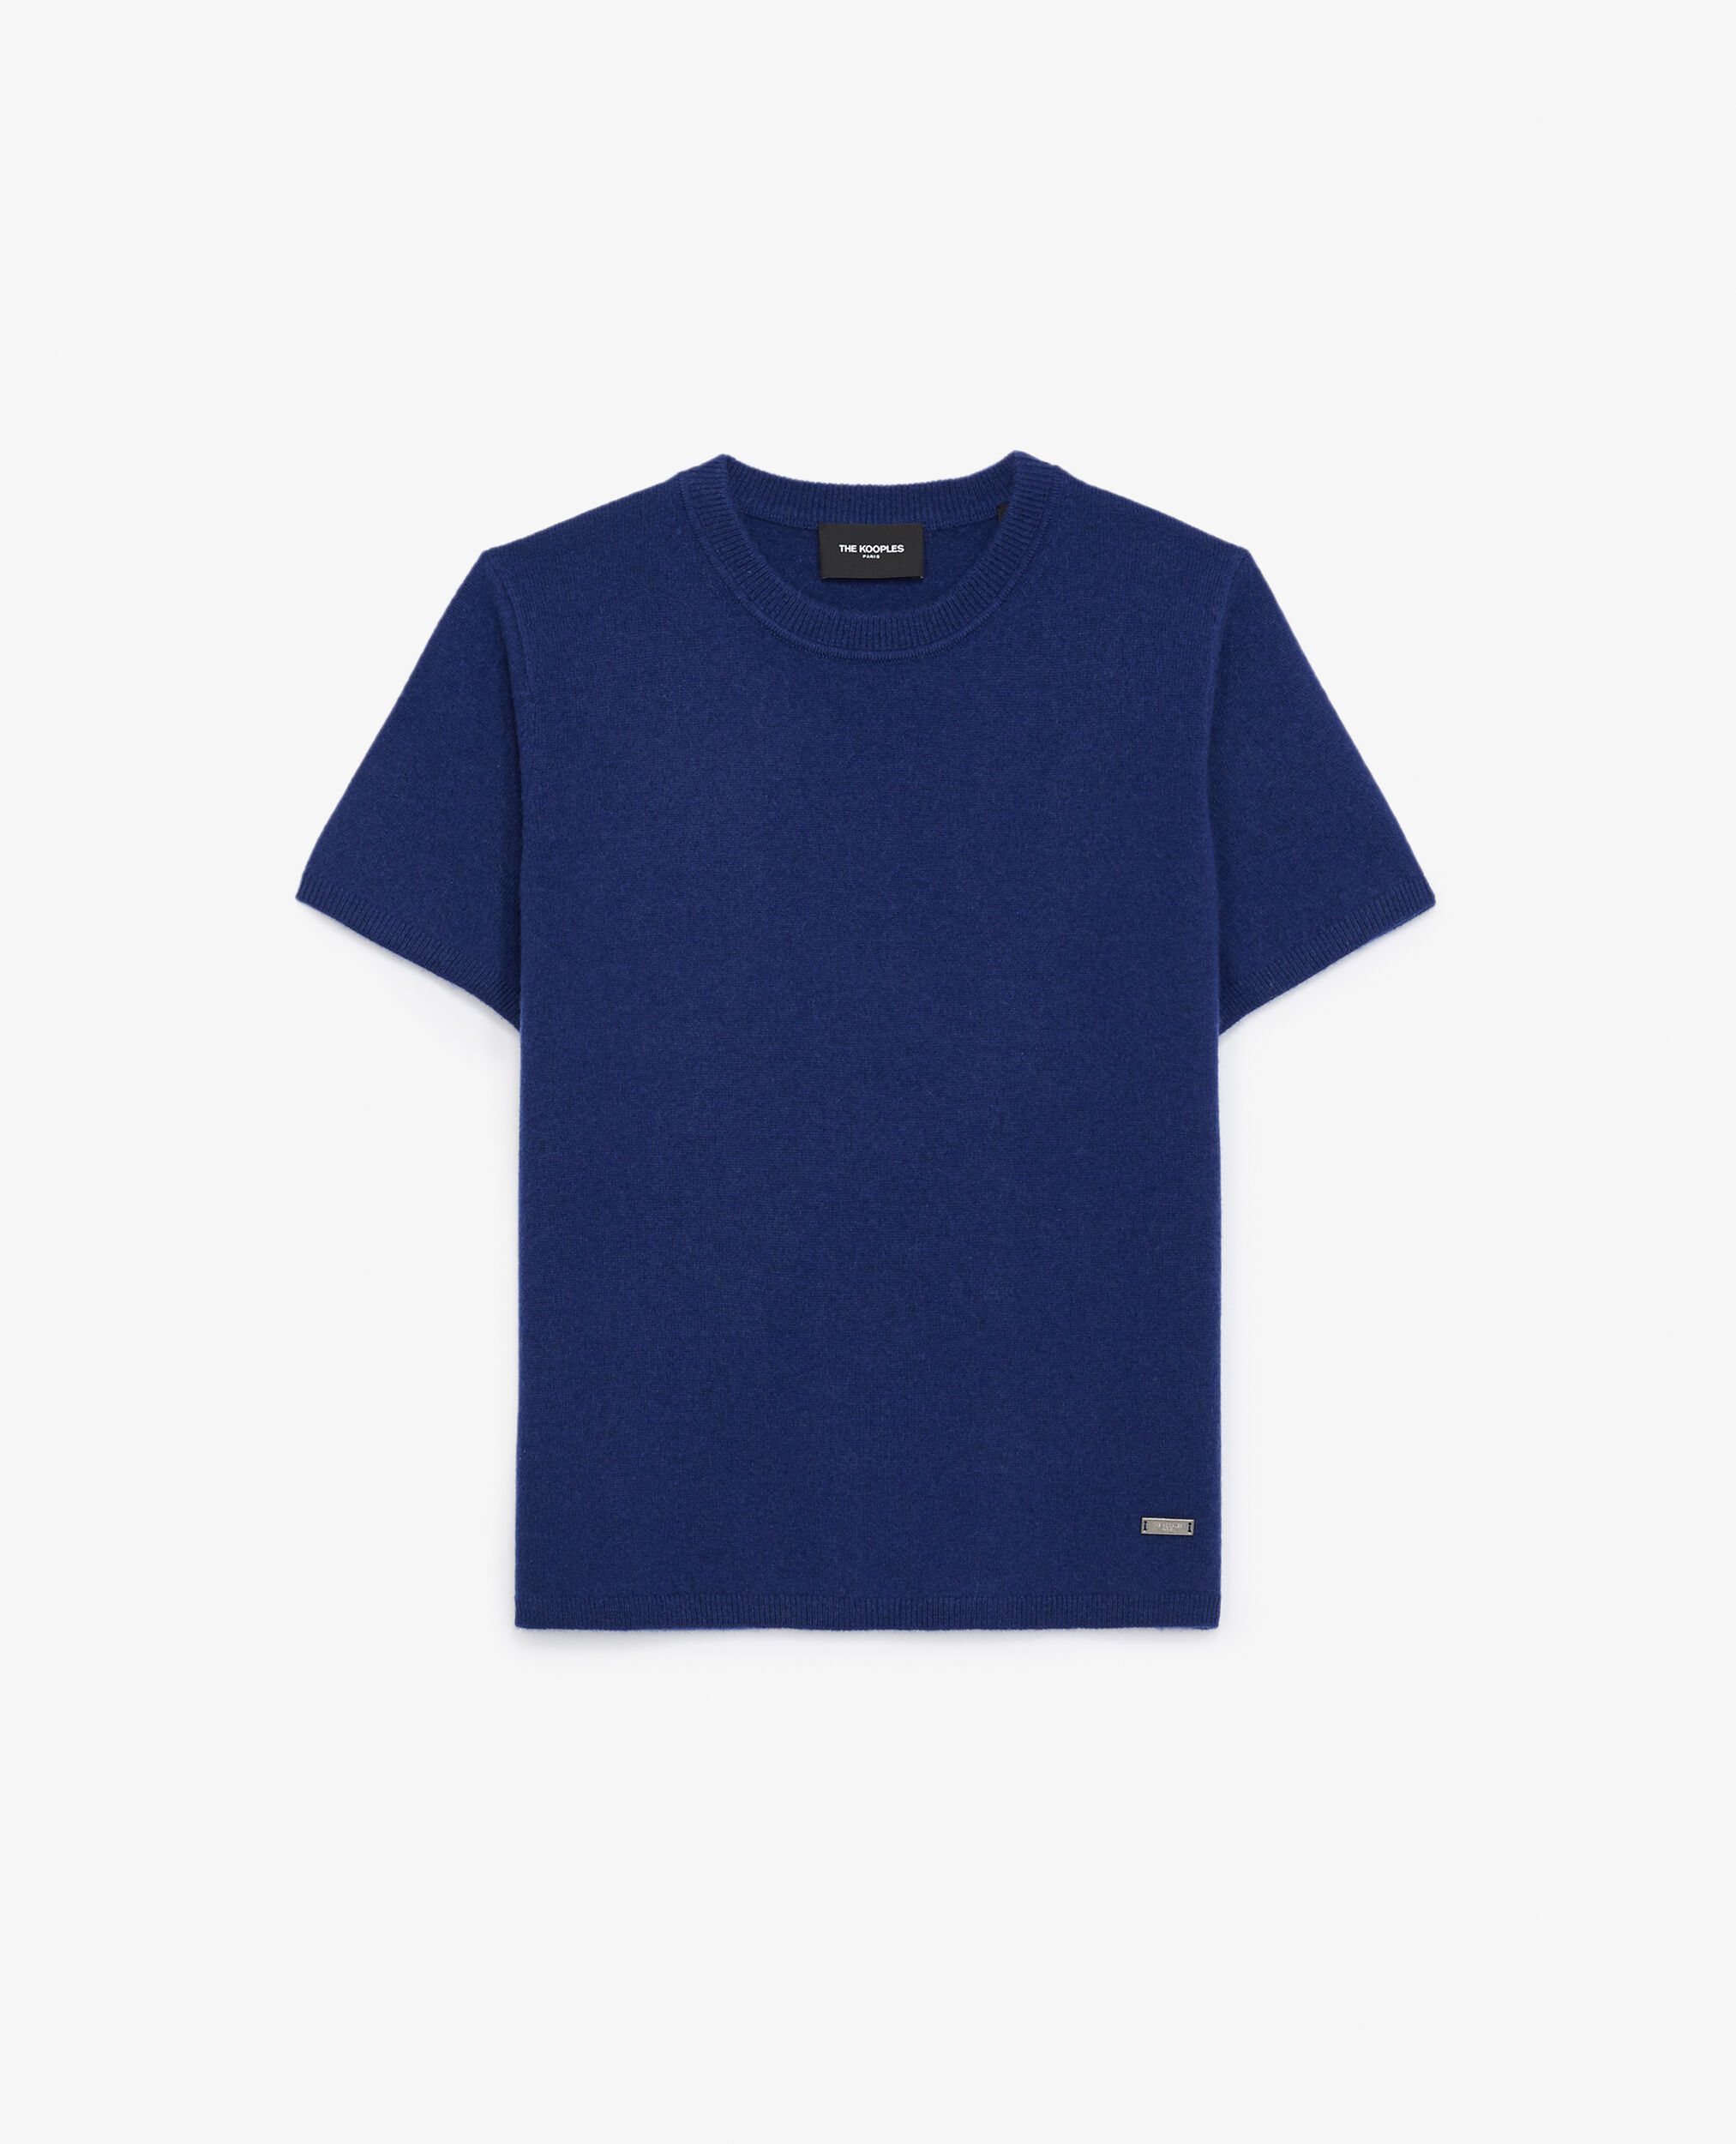 Blue cashmere sweater with short sleeves, BLUE, hi-res image number null